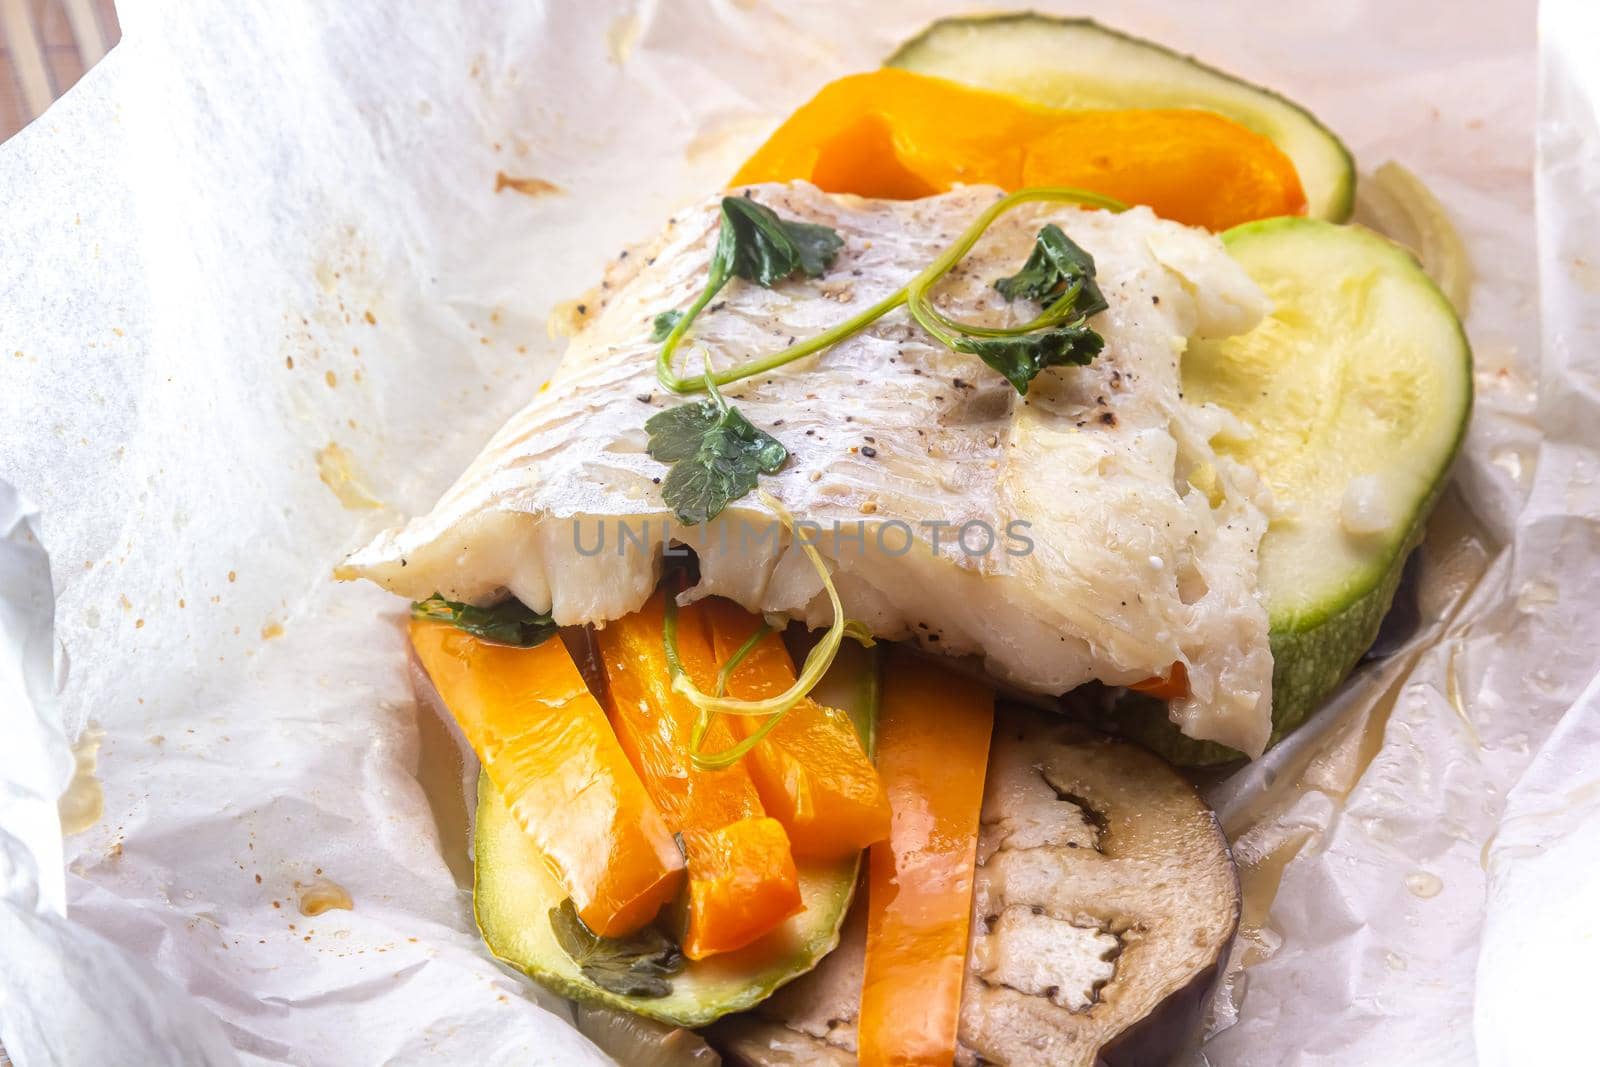 White fish fillet with vegetables in rustic style. Healthy eating: cooked fish fillet with vegetables garnish. Diet food with white fish and vegetables. Steam vegetables with roasted zander fillet by Milanchikov